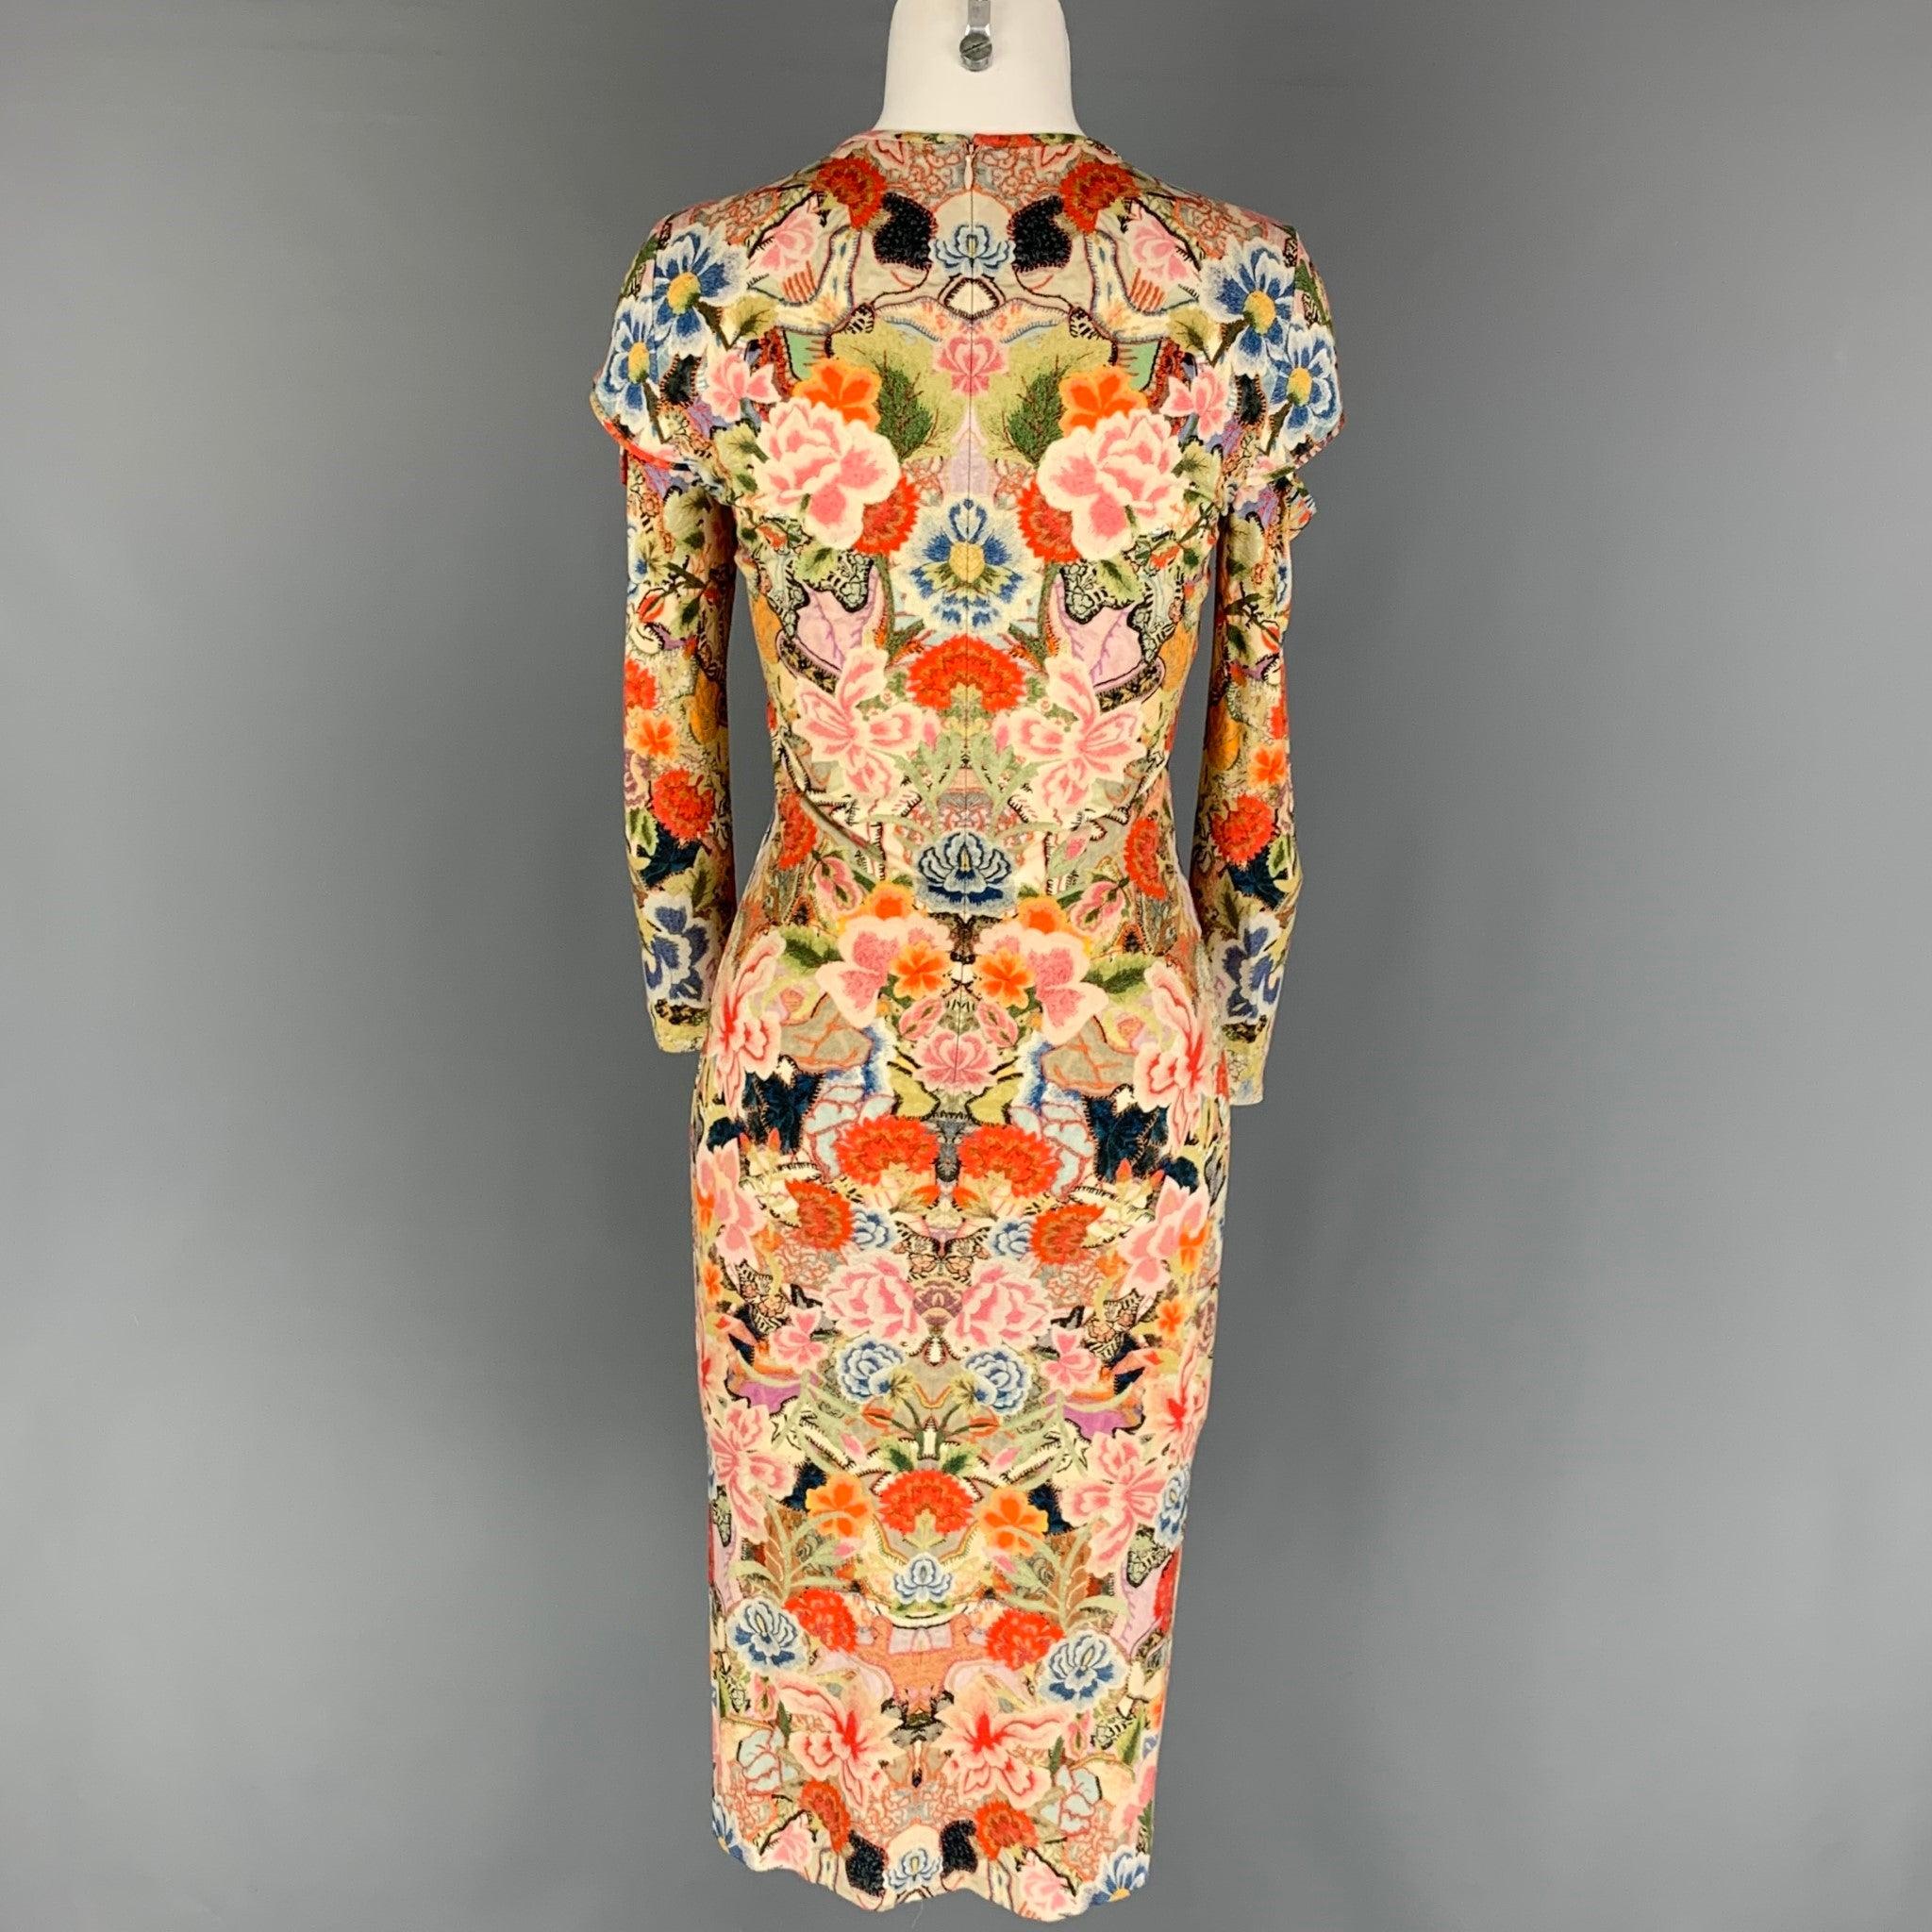 ALEXANDER MCQUEEN Size 4 Multi-Color Abstract Floral Rayon Long Sleeve Dress In Good Condition For Sale In San Francisco, CA